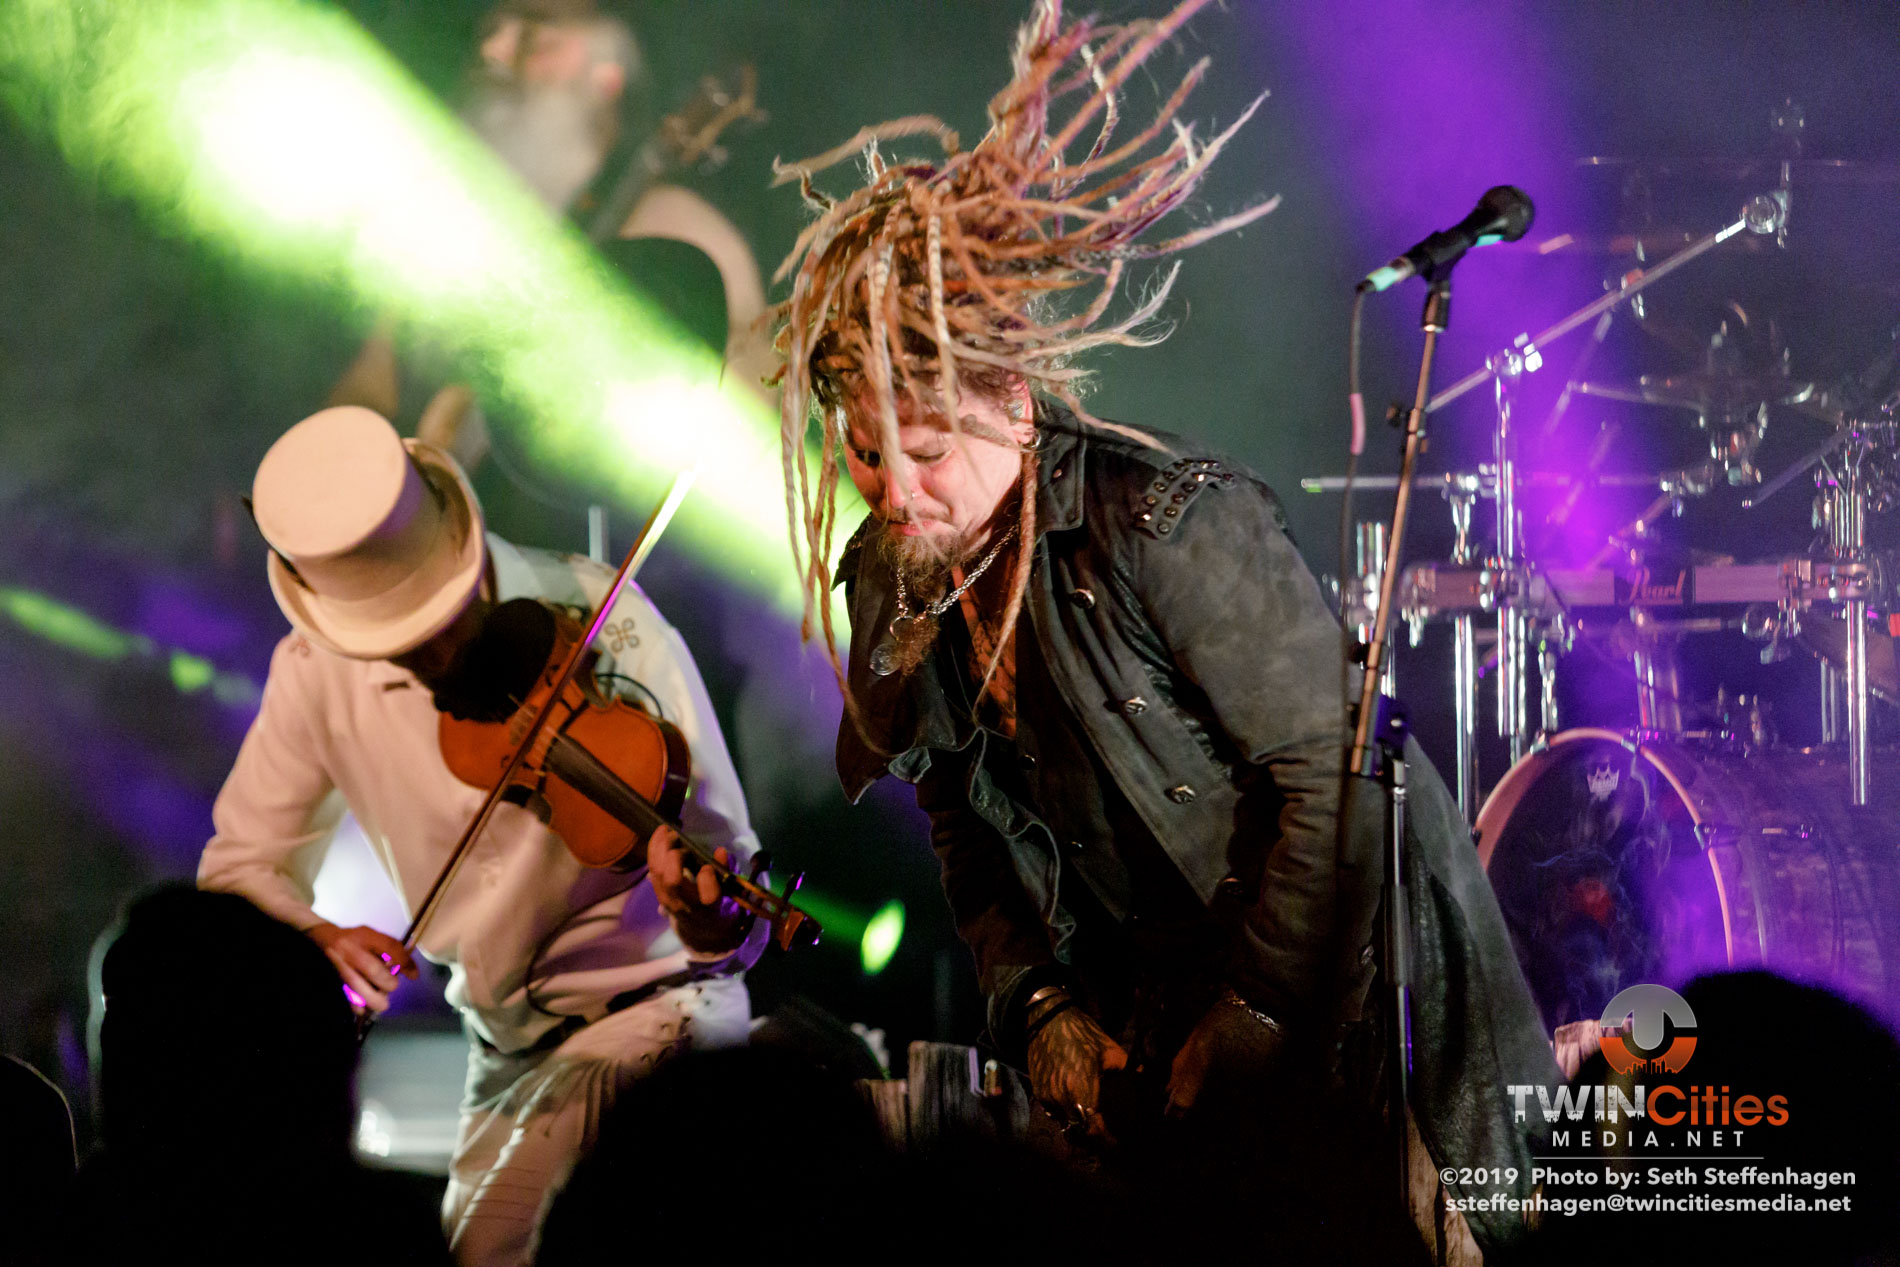 October 5, 2019 - Minneapolis, Minnesota, United States - Korpiklaani live in concert at The Cabooze co-headlining with Eluveitie and with Gone In April as the openers.

(Photo by Seth Steffenhagen/Steffenhagen Photography)